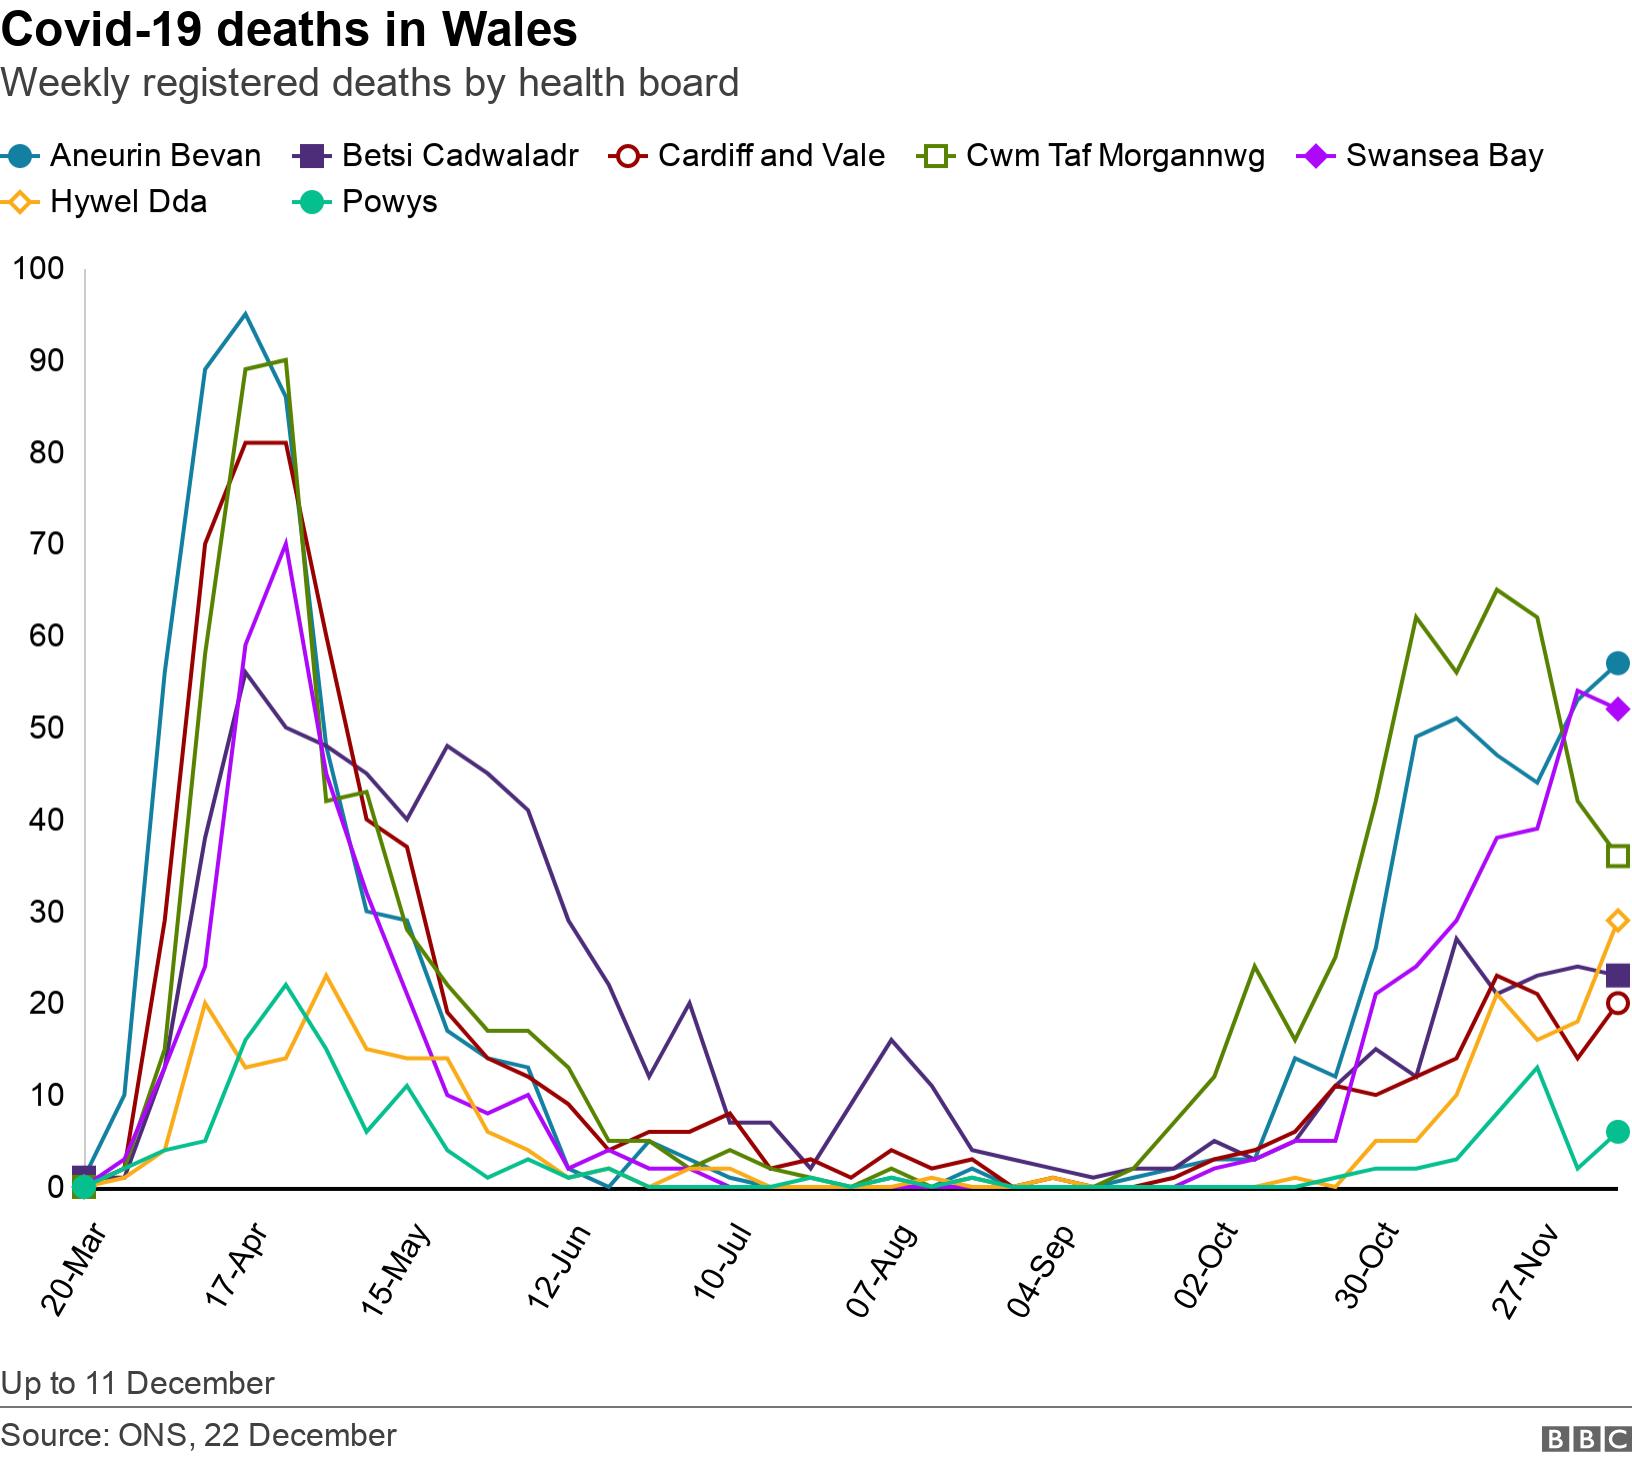 Covid-19 deaths in Wales. Weekly registered deaths by health board. Up to 11 December.